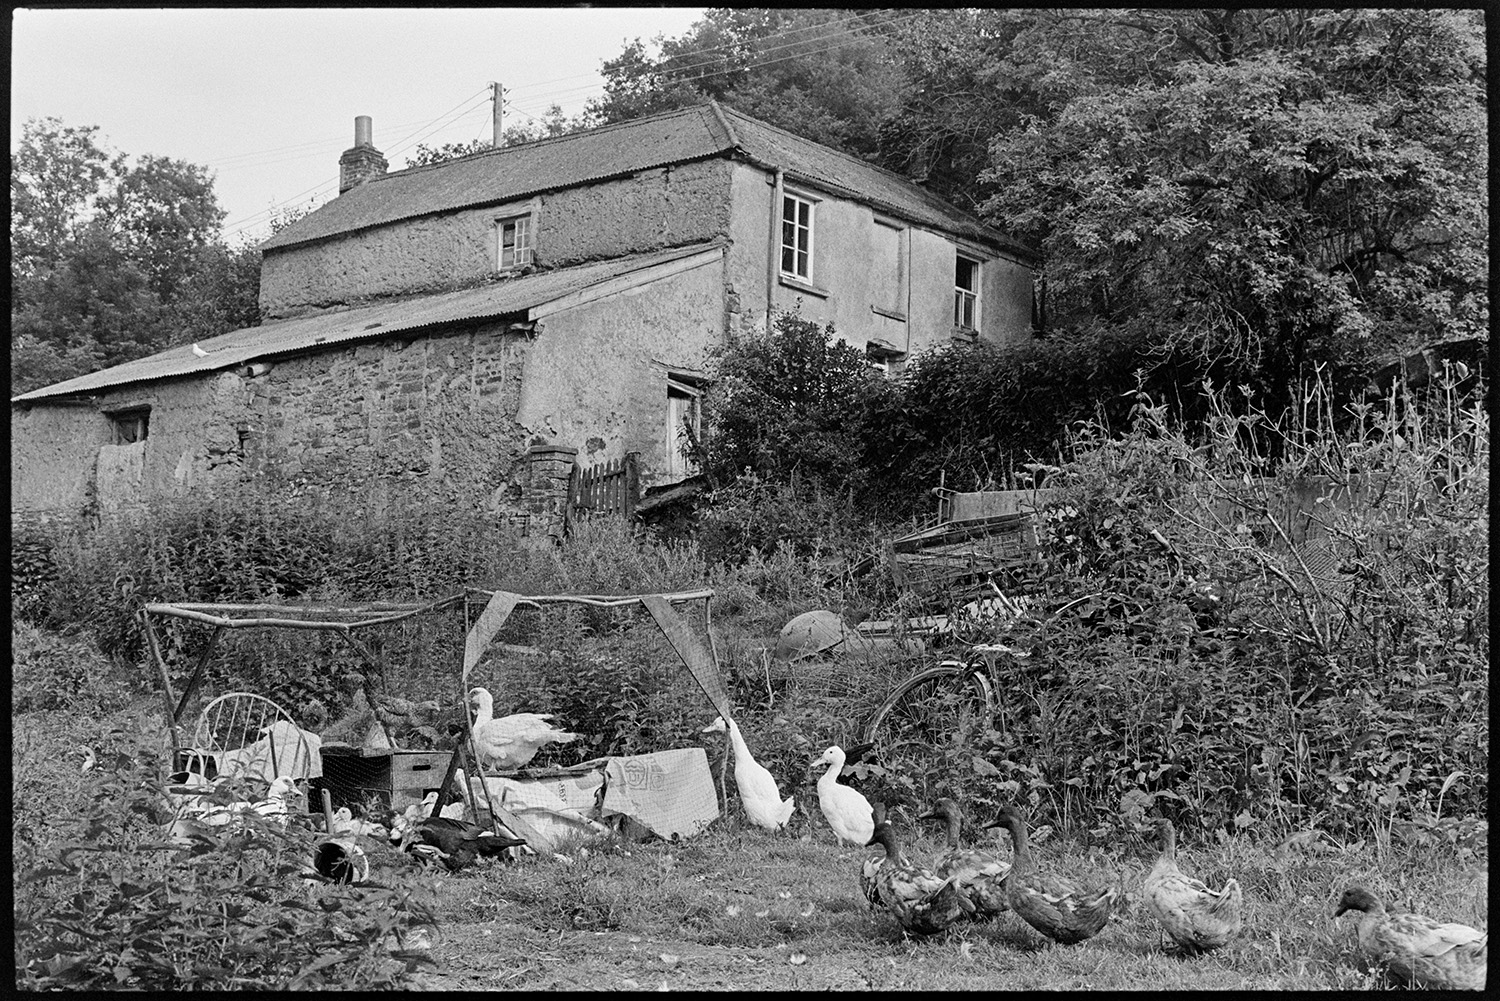 House with messy yard and ducks. 
[An overgrown field with various paraphernalia including an old bicycle wheel, wooden drawers and a small enclosure at Millhams, Dolton. Ducks are in the foreground and a house can be seen in the background.]